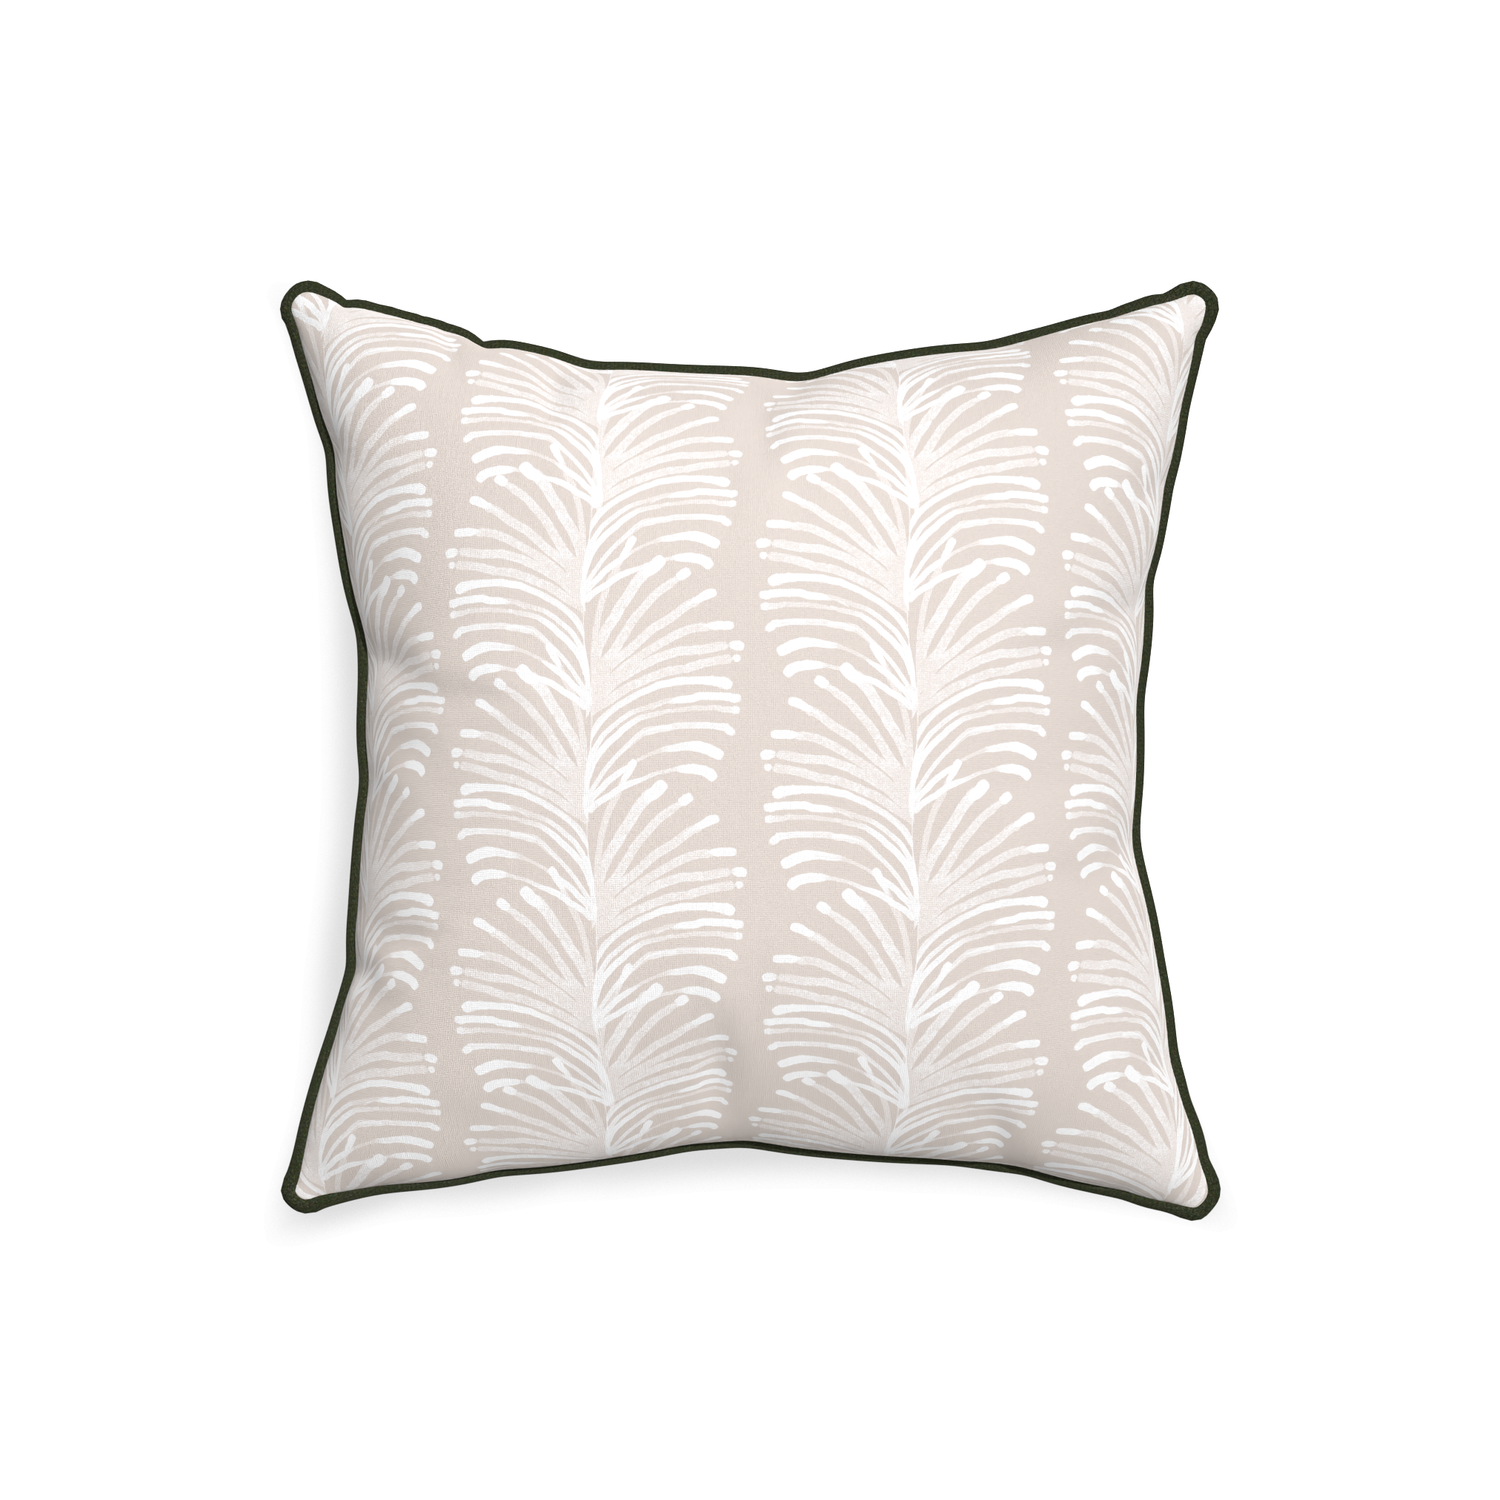 20-square emma sand custom sand colored botanical stripepillow with f piping on white background